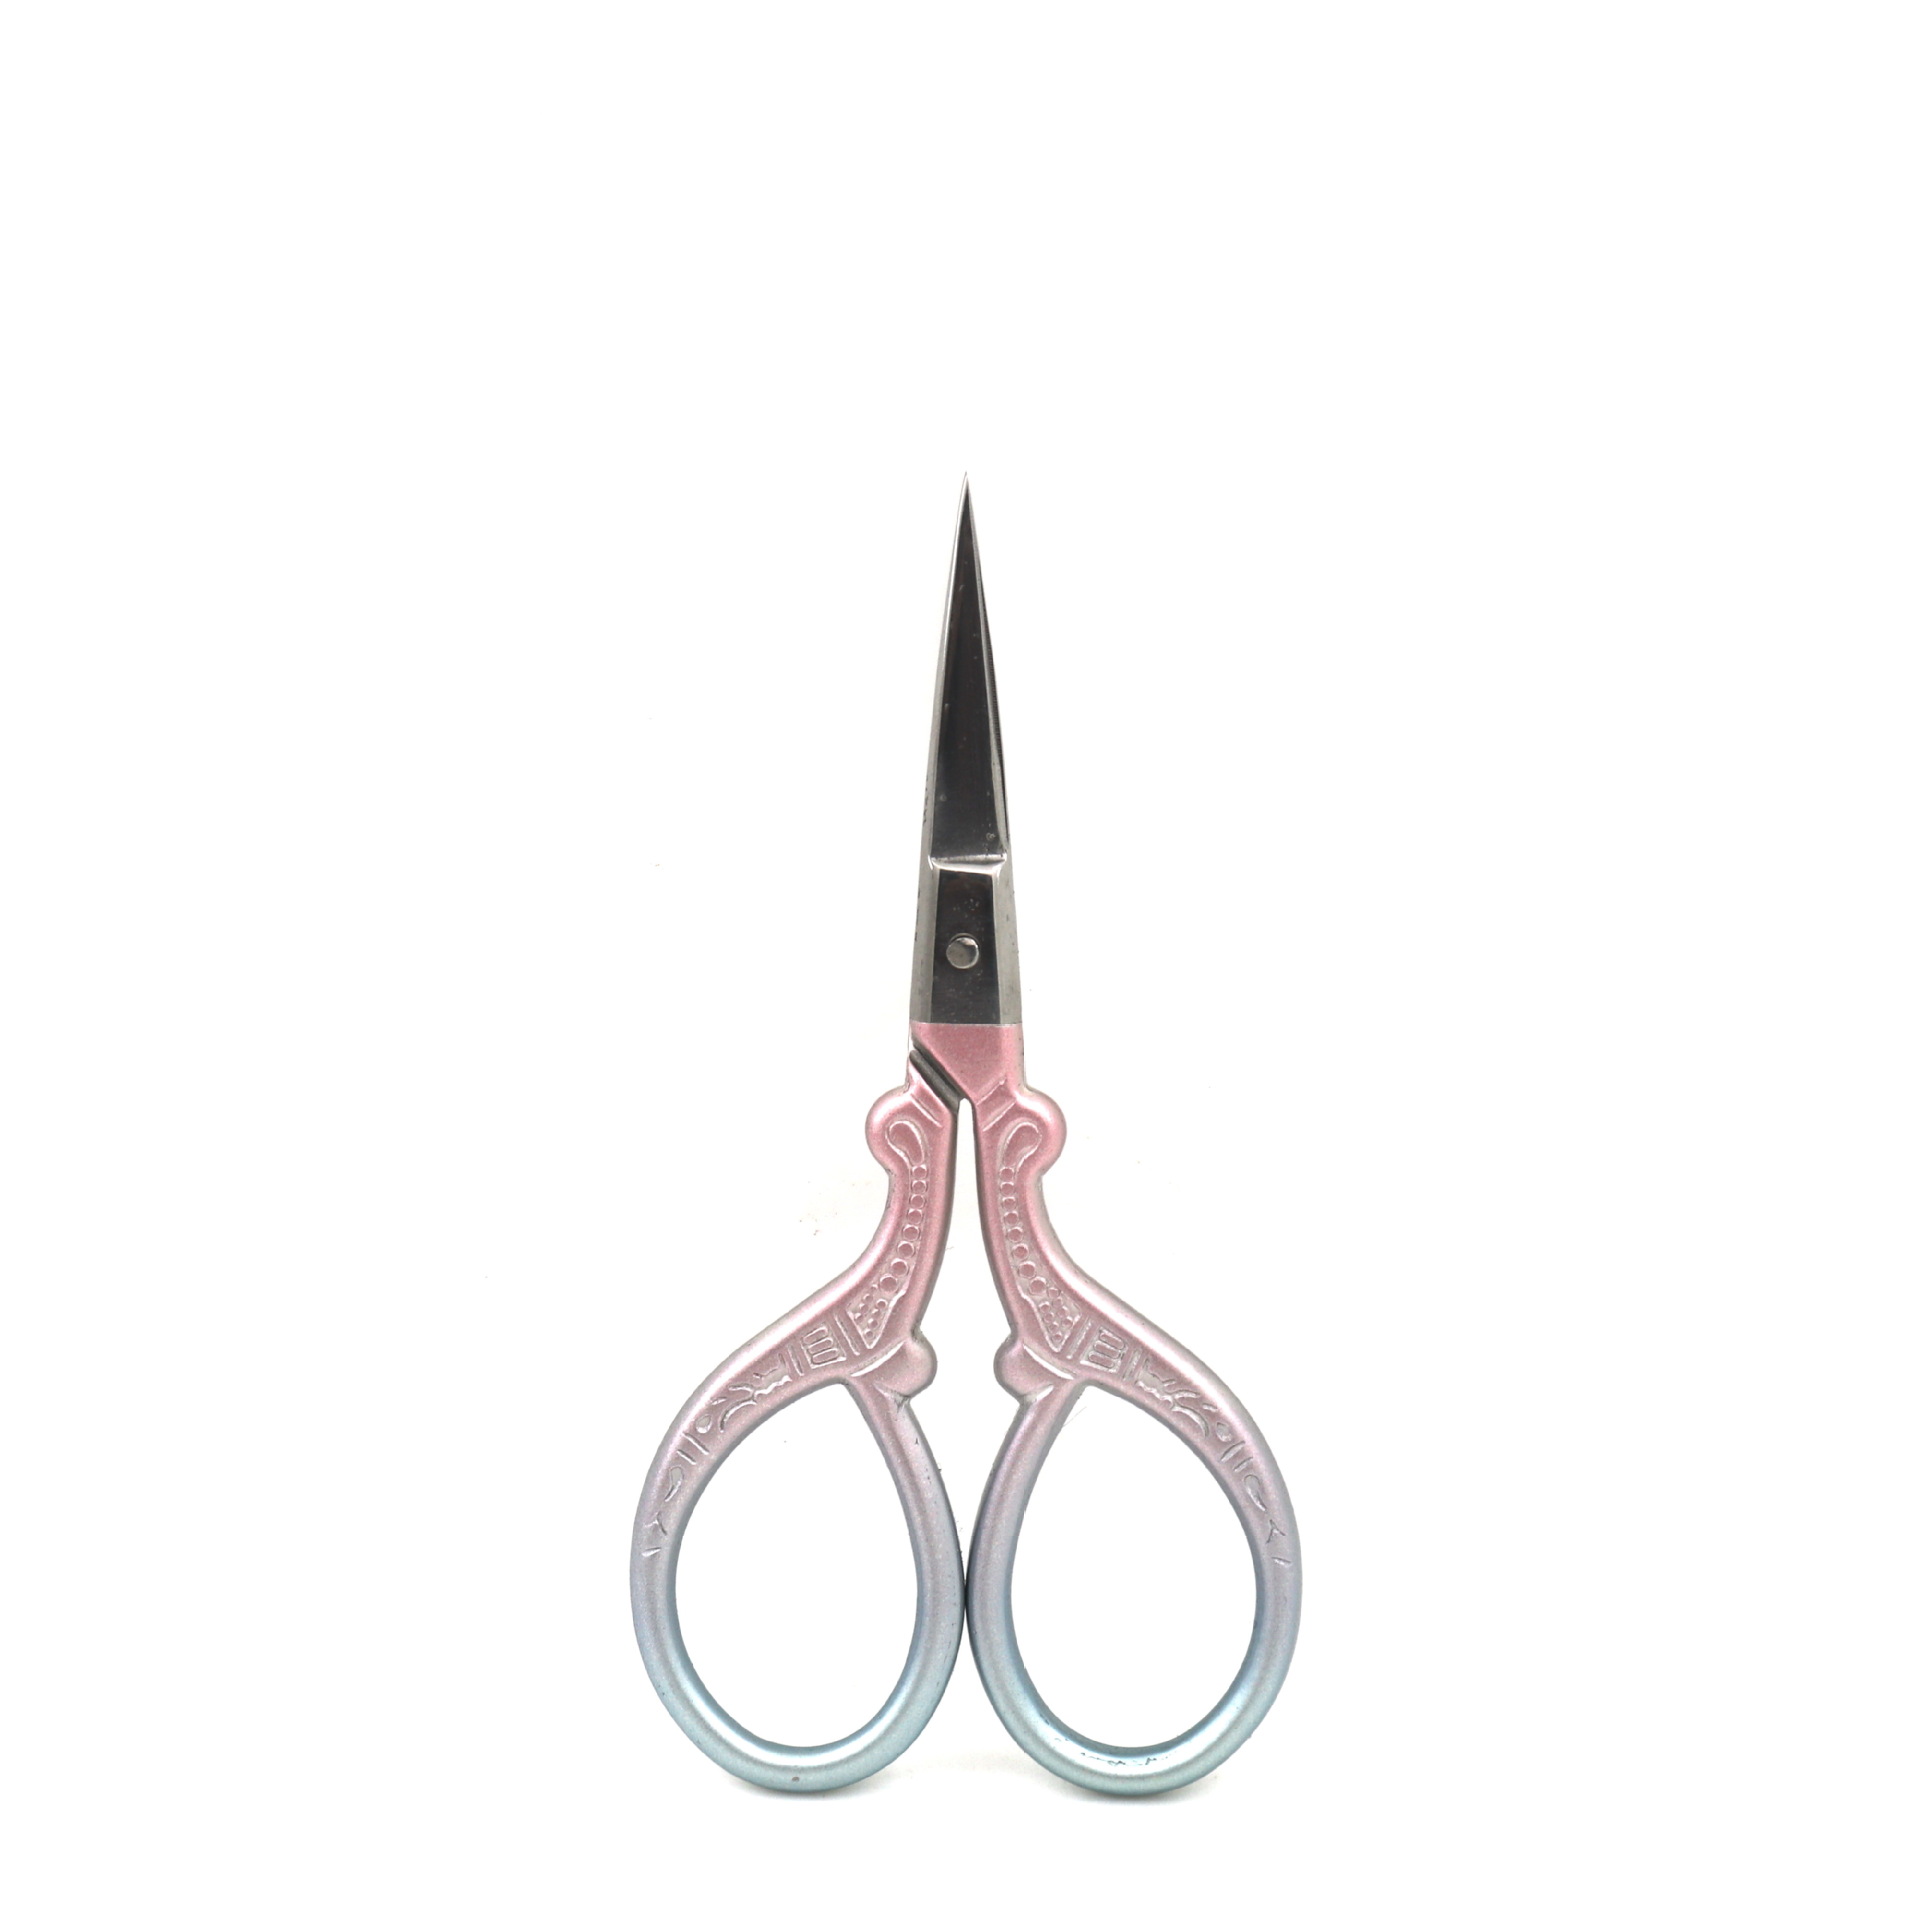 Sewing Scissors Sharp Embroidery Scissors with Sheath, Craft